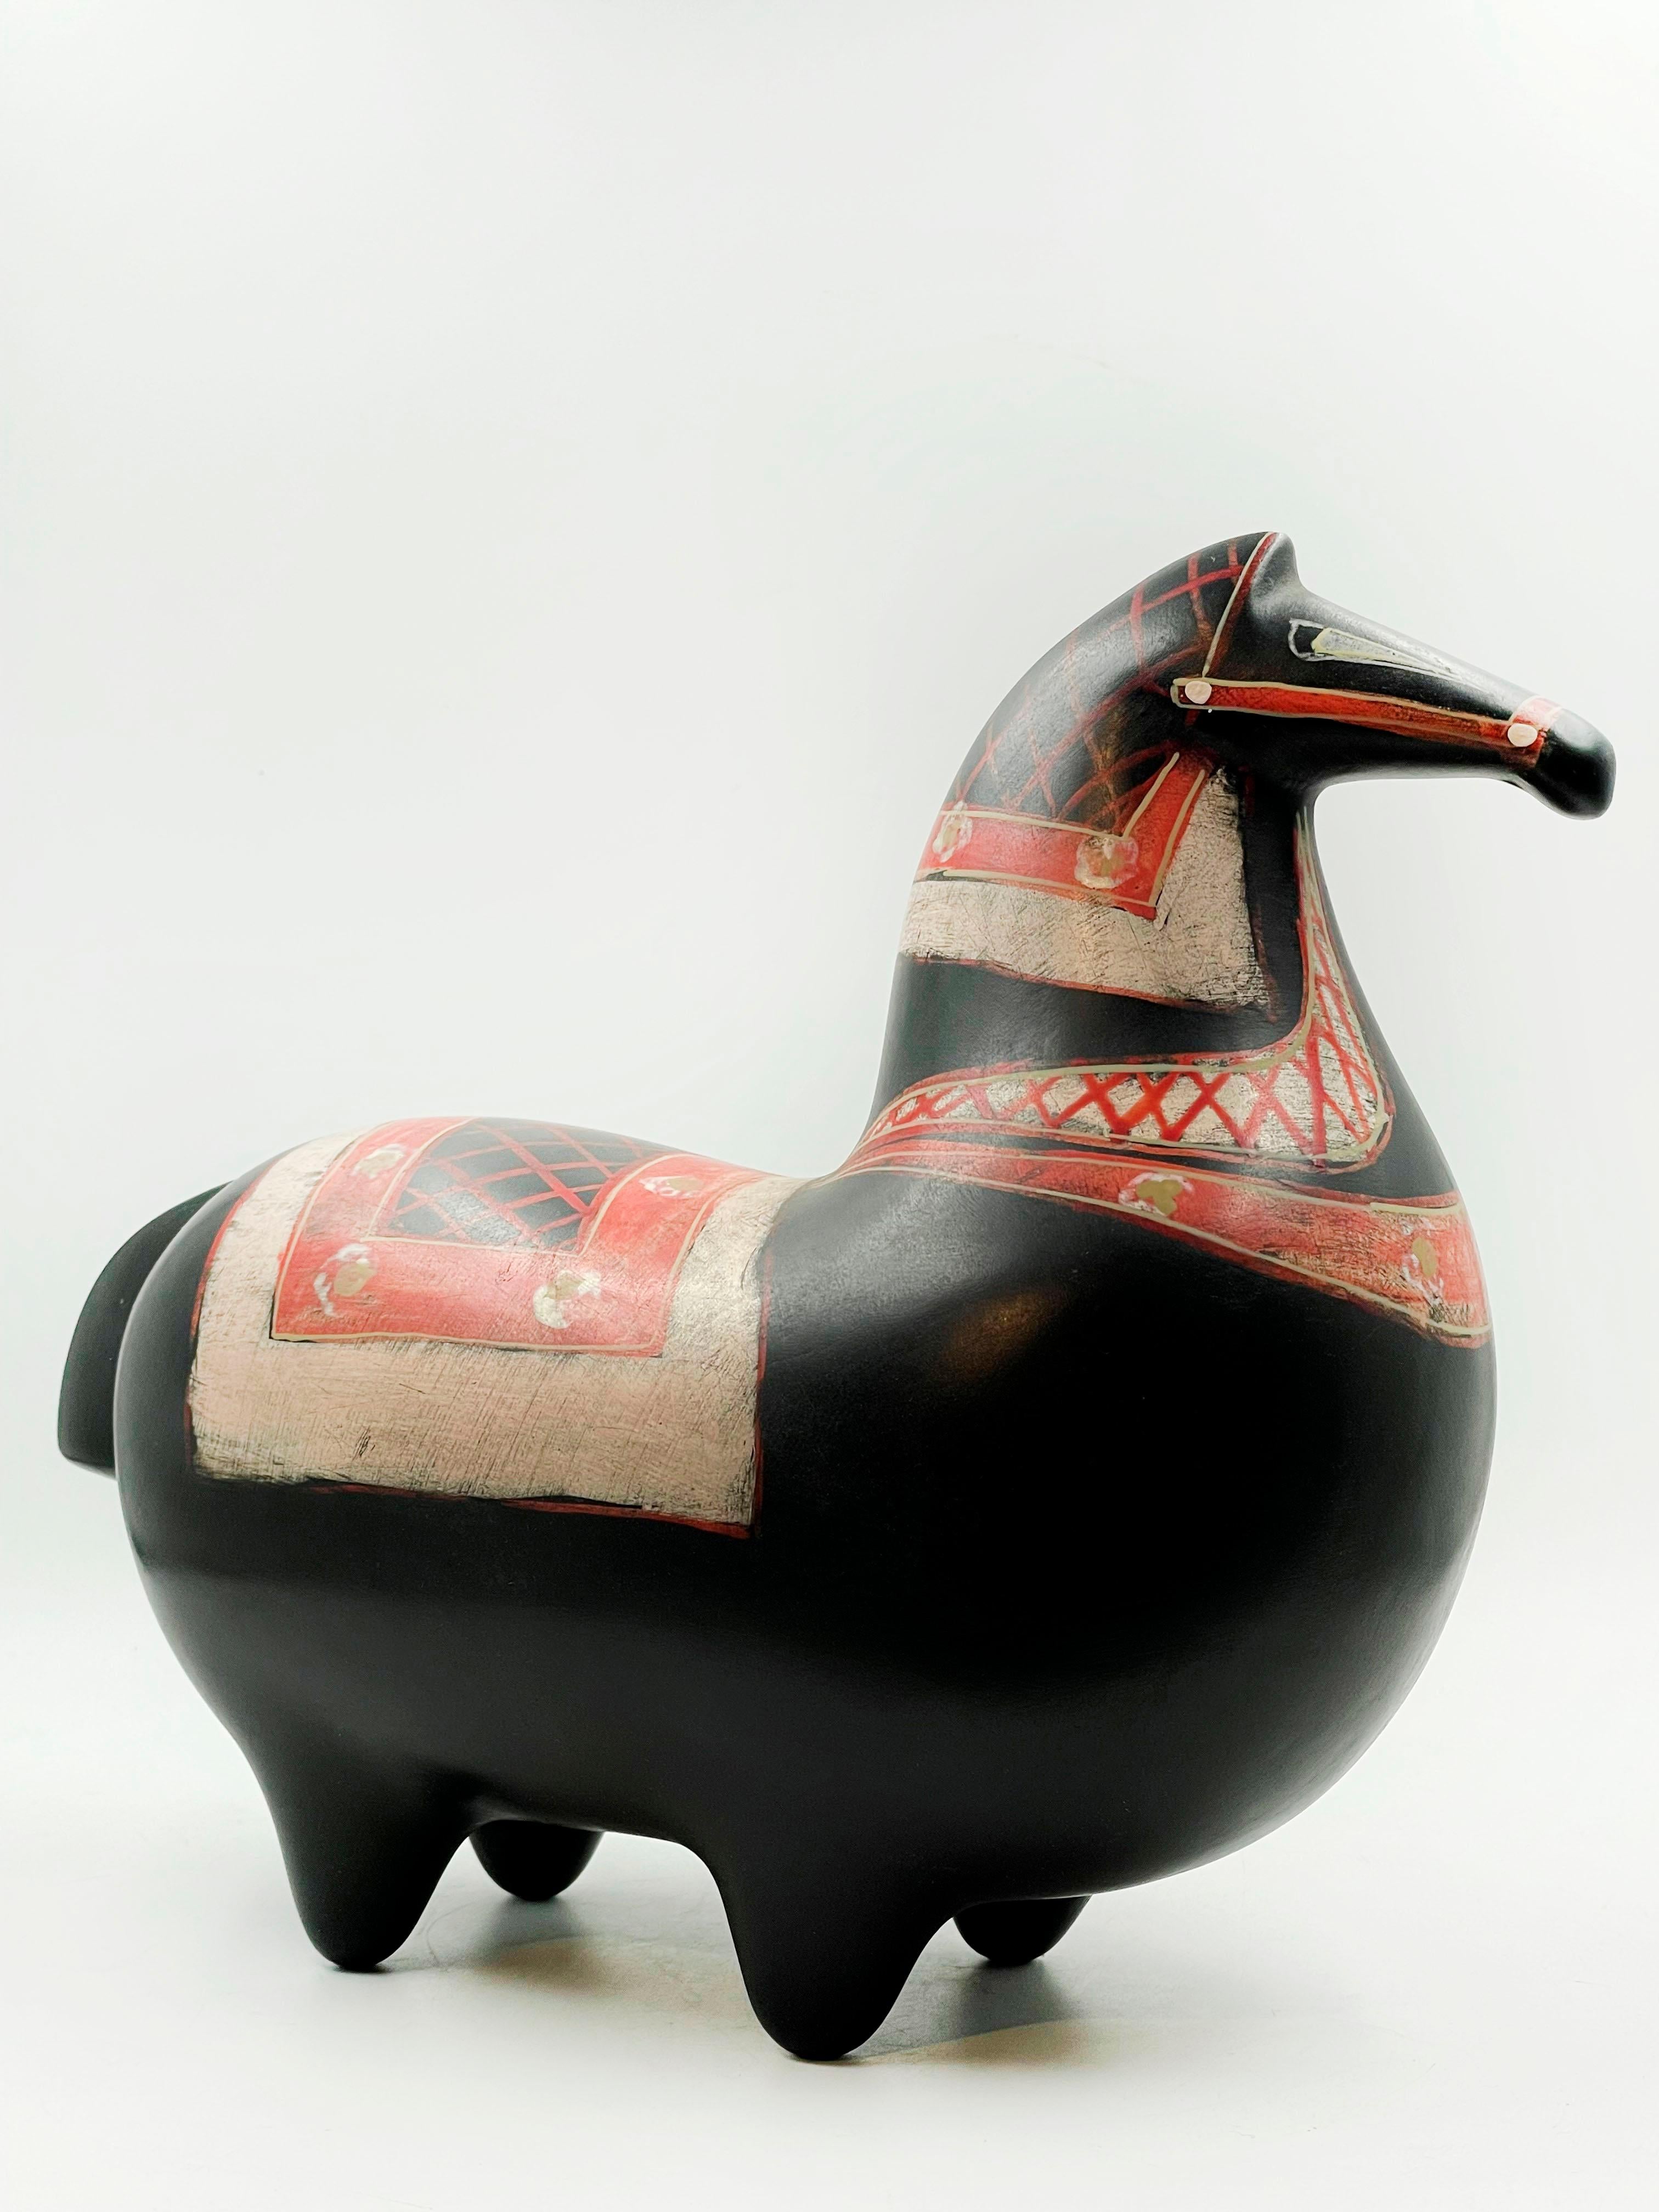 Beautiful Gustavsberg Sweden style racehorse piece in black with orange and veige painted details
Measures:
Height: 20 centimeters
Length: 25 centimeters